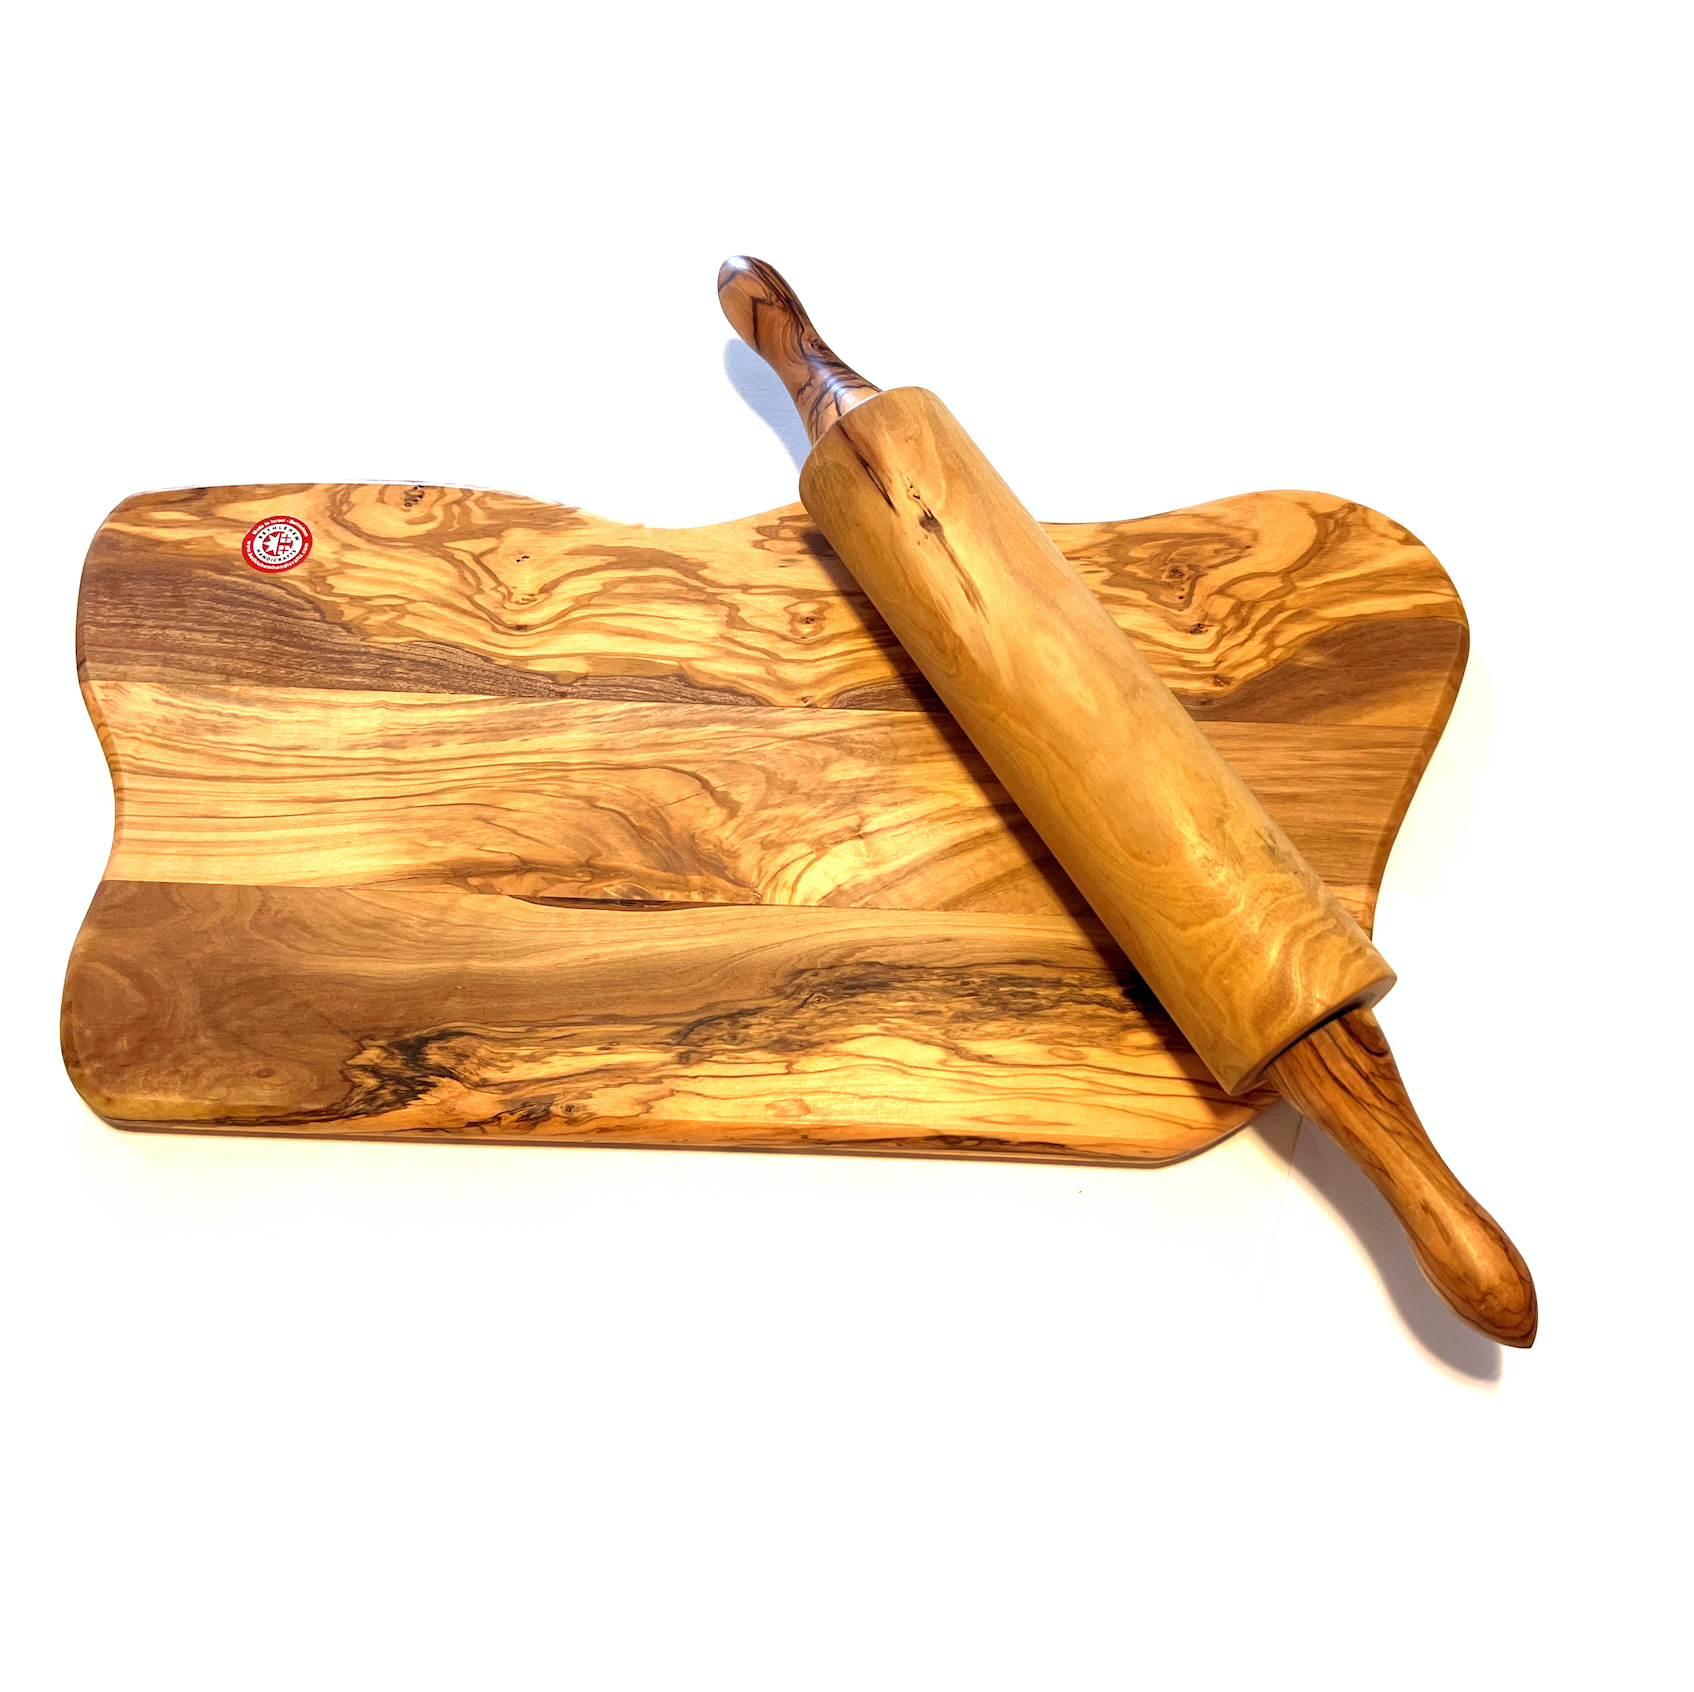 Cutting board from Olive Wood Handcrafted – Jamailah